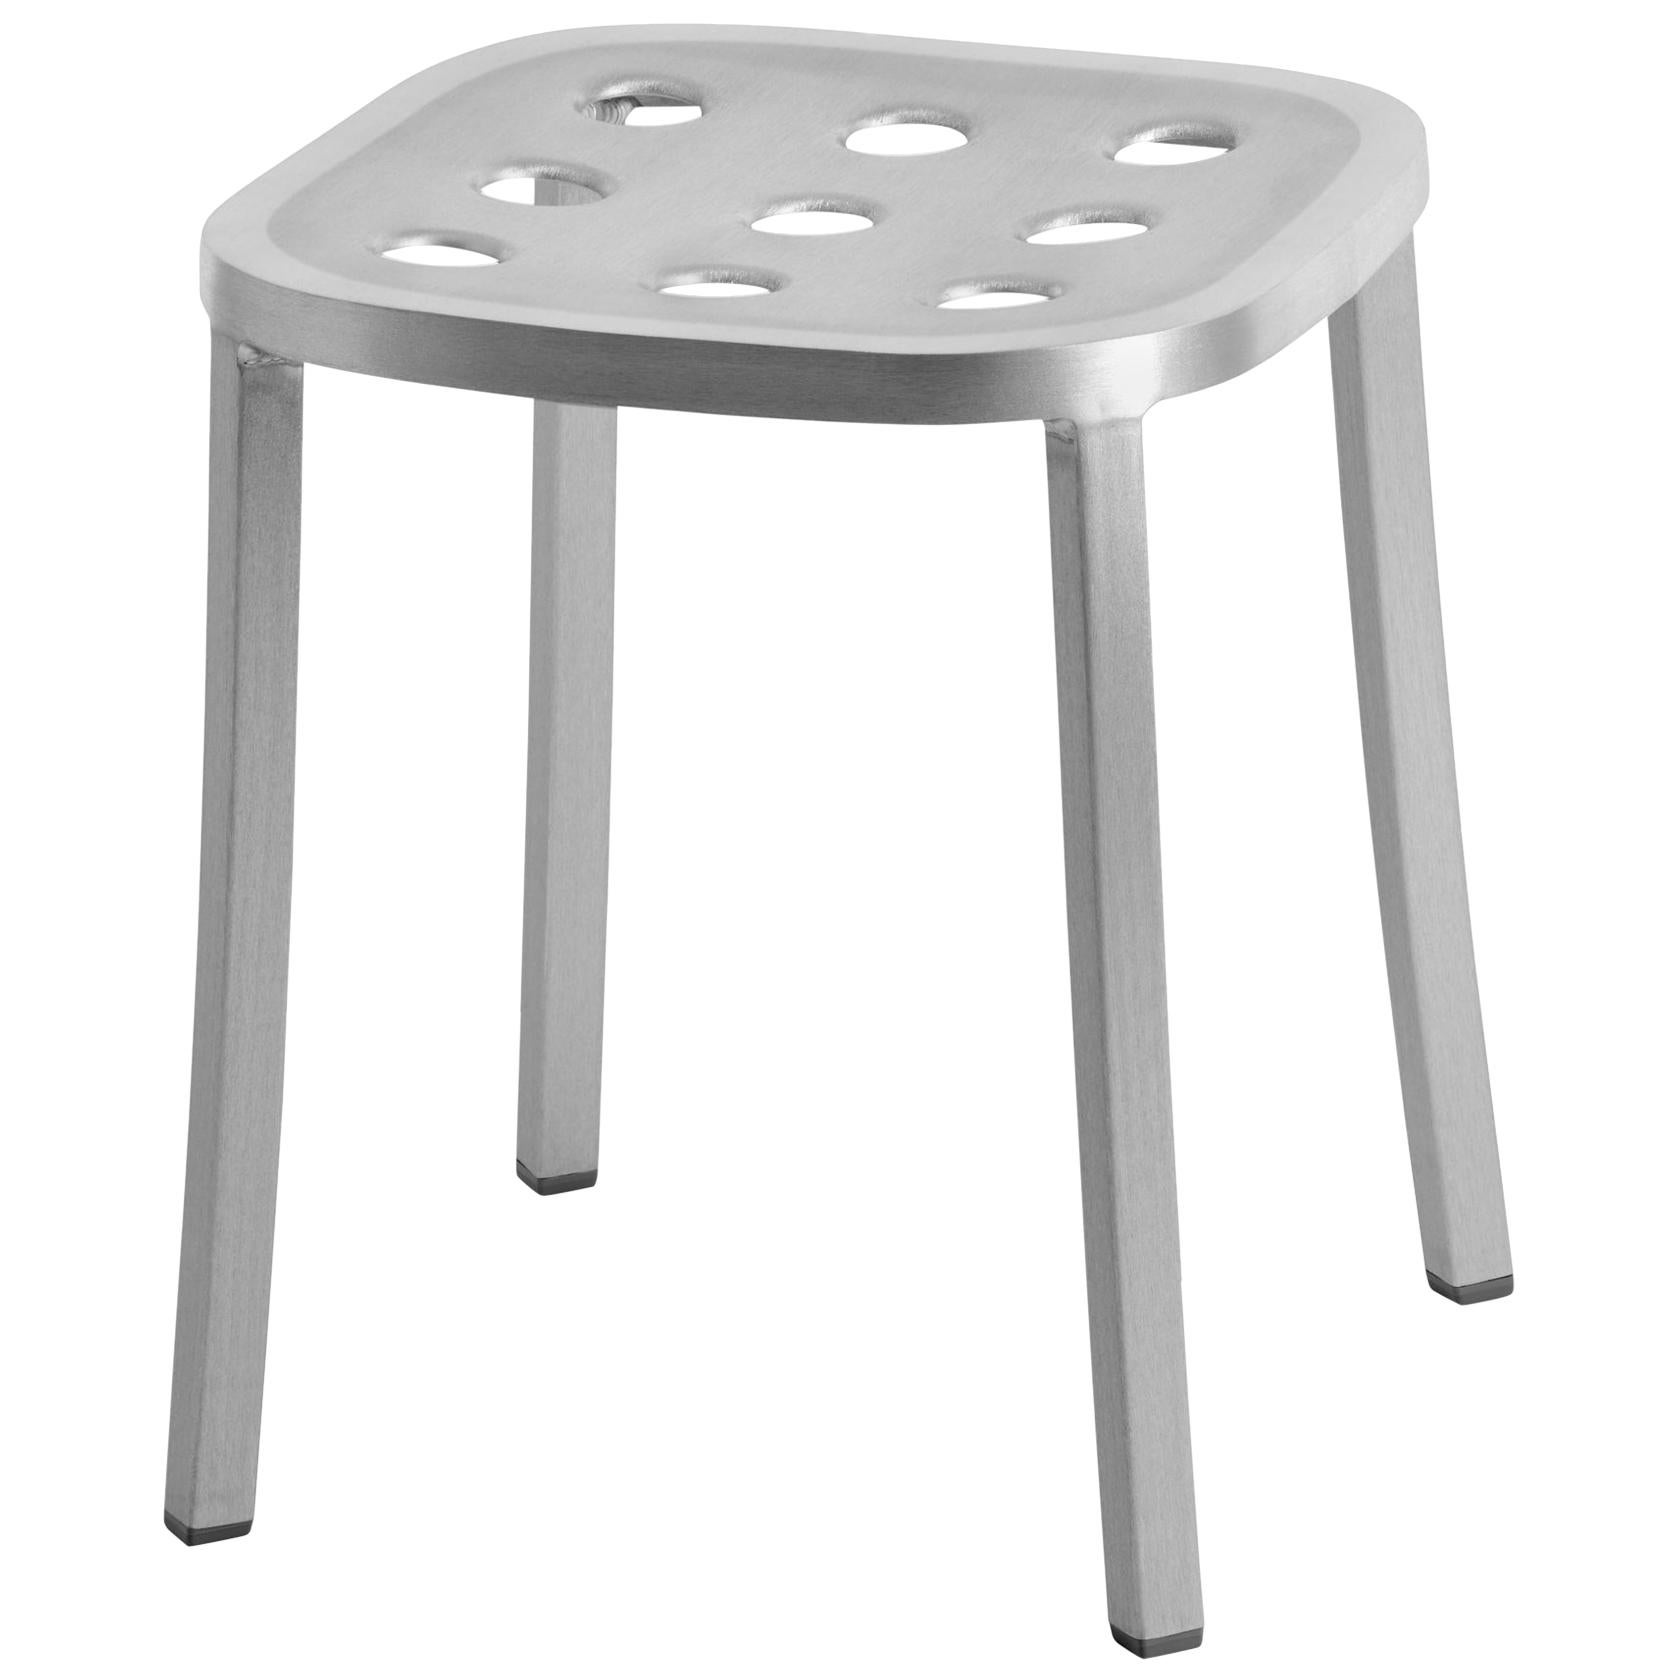 Emeco 1 Inch All Aluminum Small Stool by Jasper Morrison, 1stdibs Exclusive